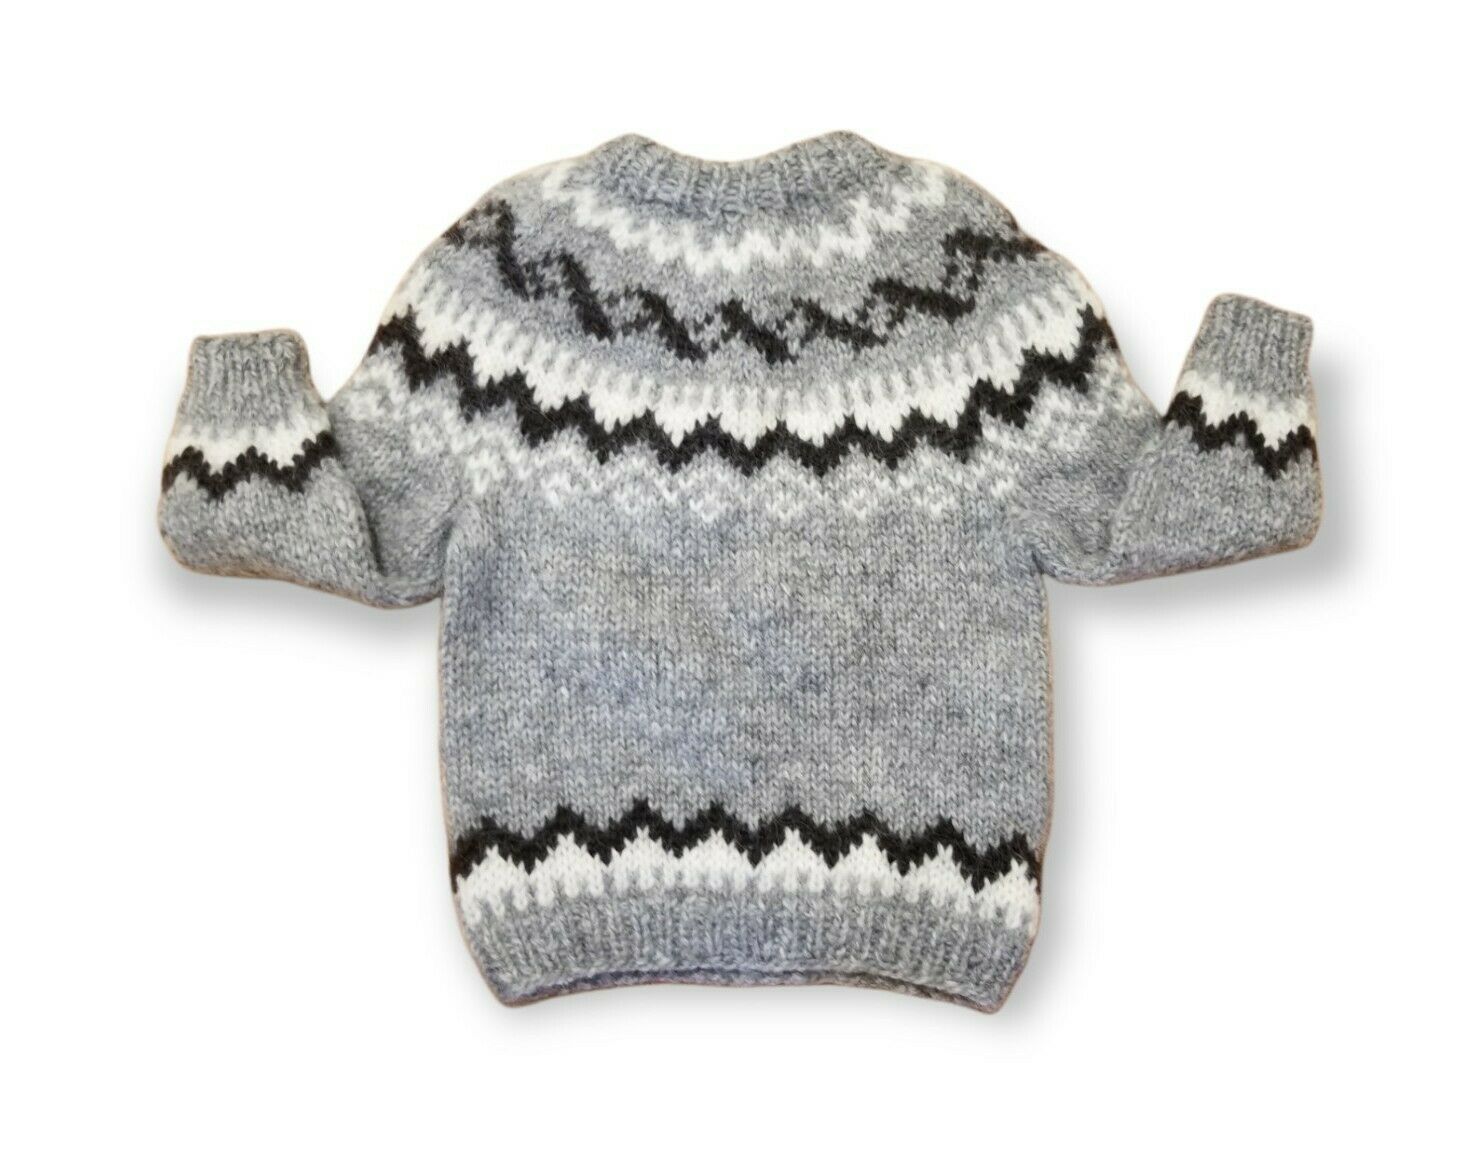 Childs Fair Isle Icelandic Sweater Size S? Unisex Nos Nwt Hand Knitted